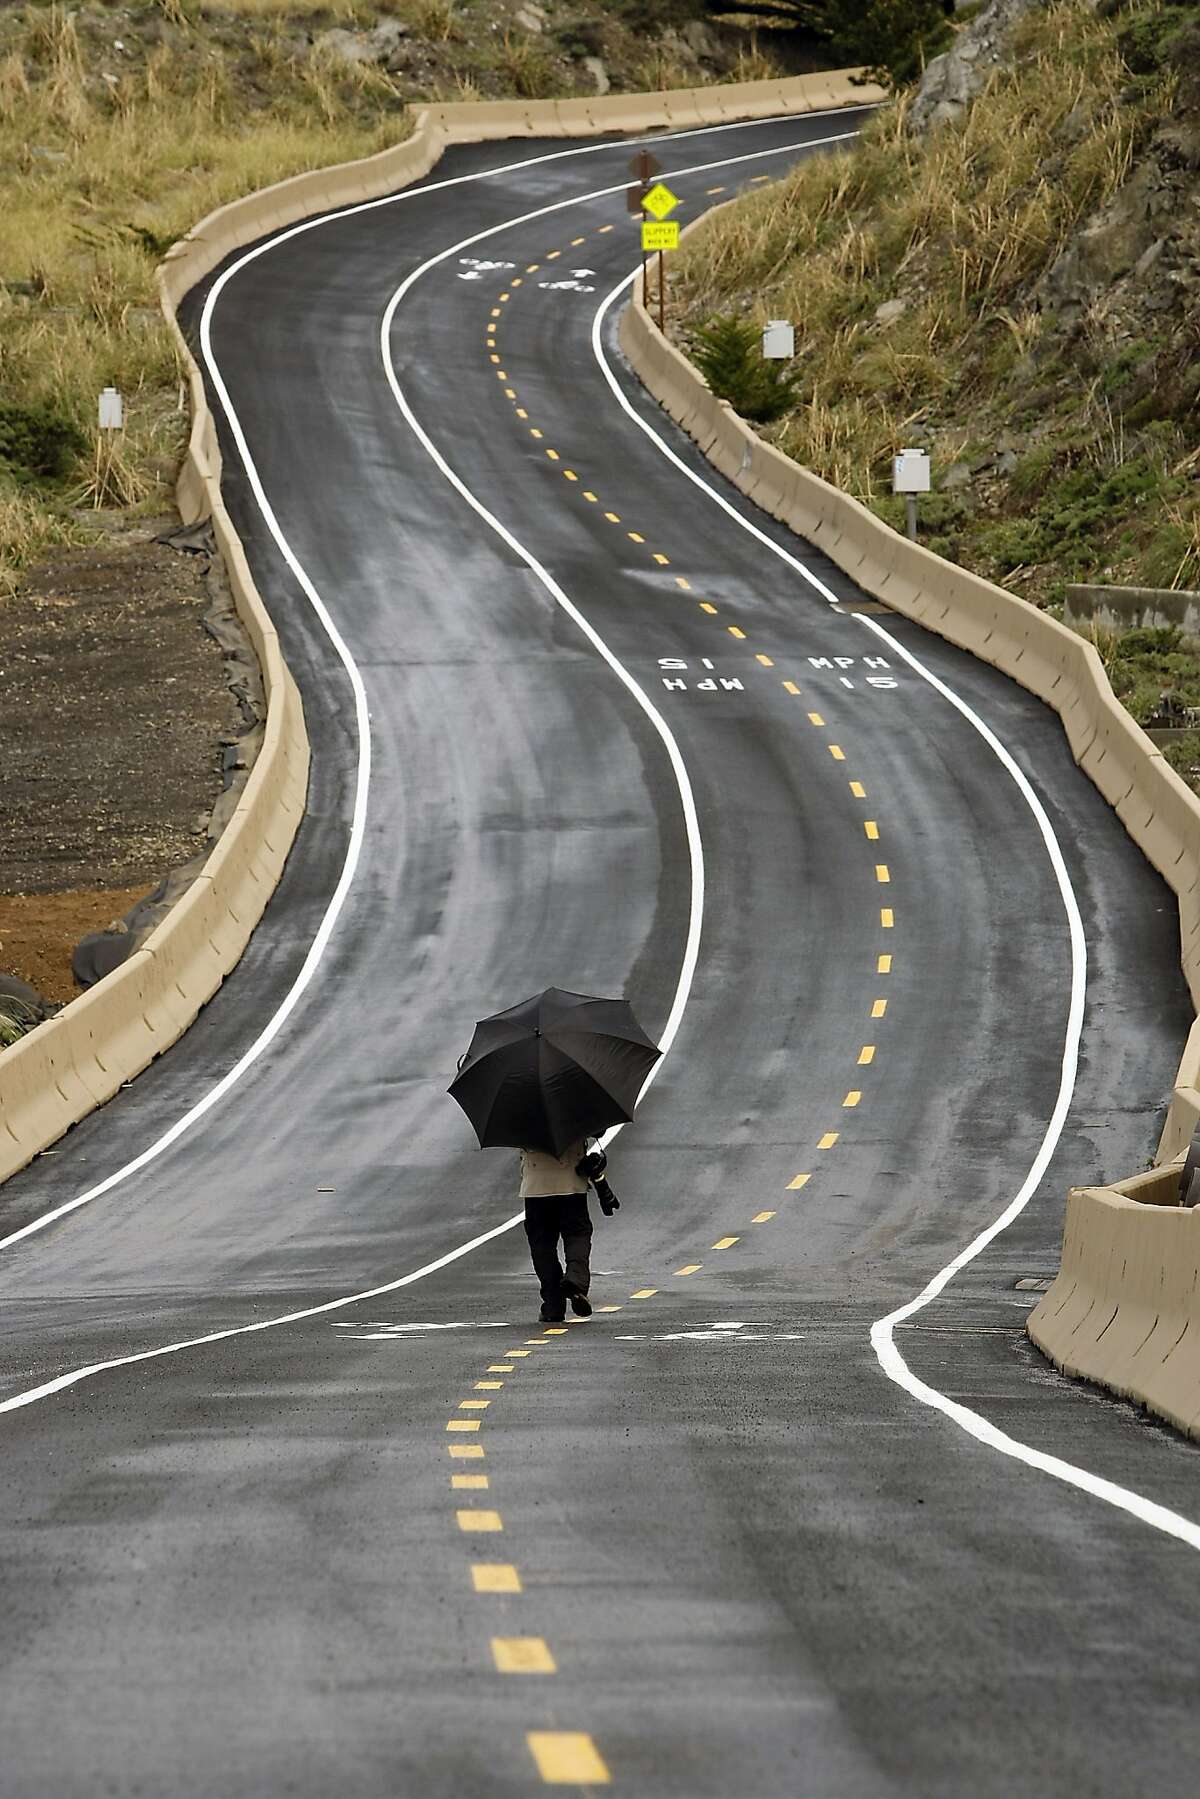 A member of the media walks up along the trail during a media tour of the newly completed Devil's Slide Costal Trail in Montara, CA, Tuesday Mar. 25, 2014.